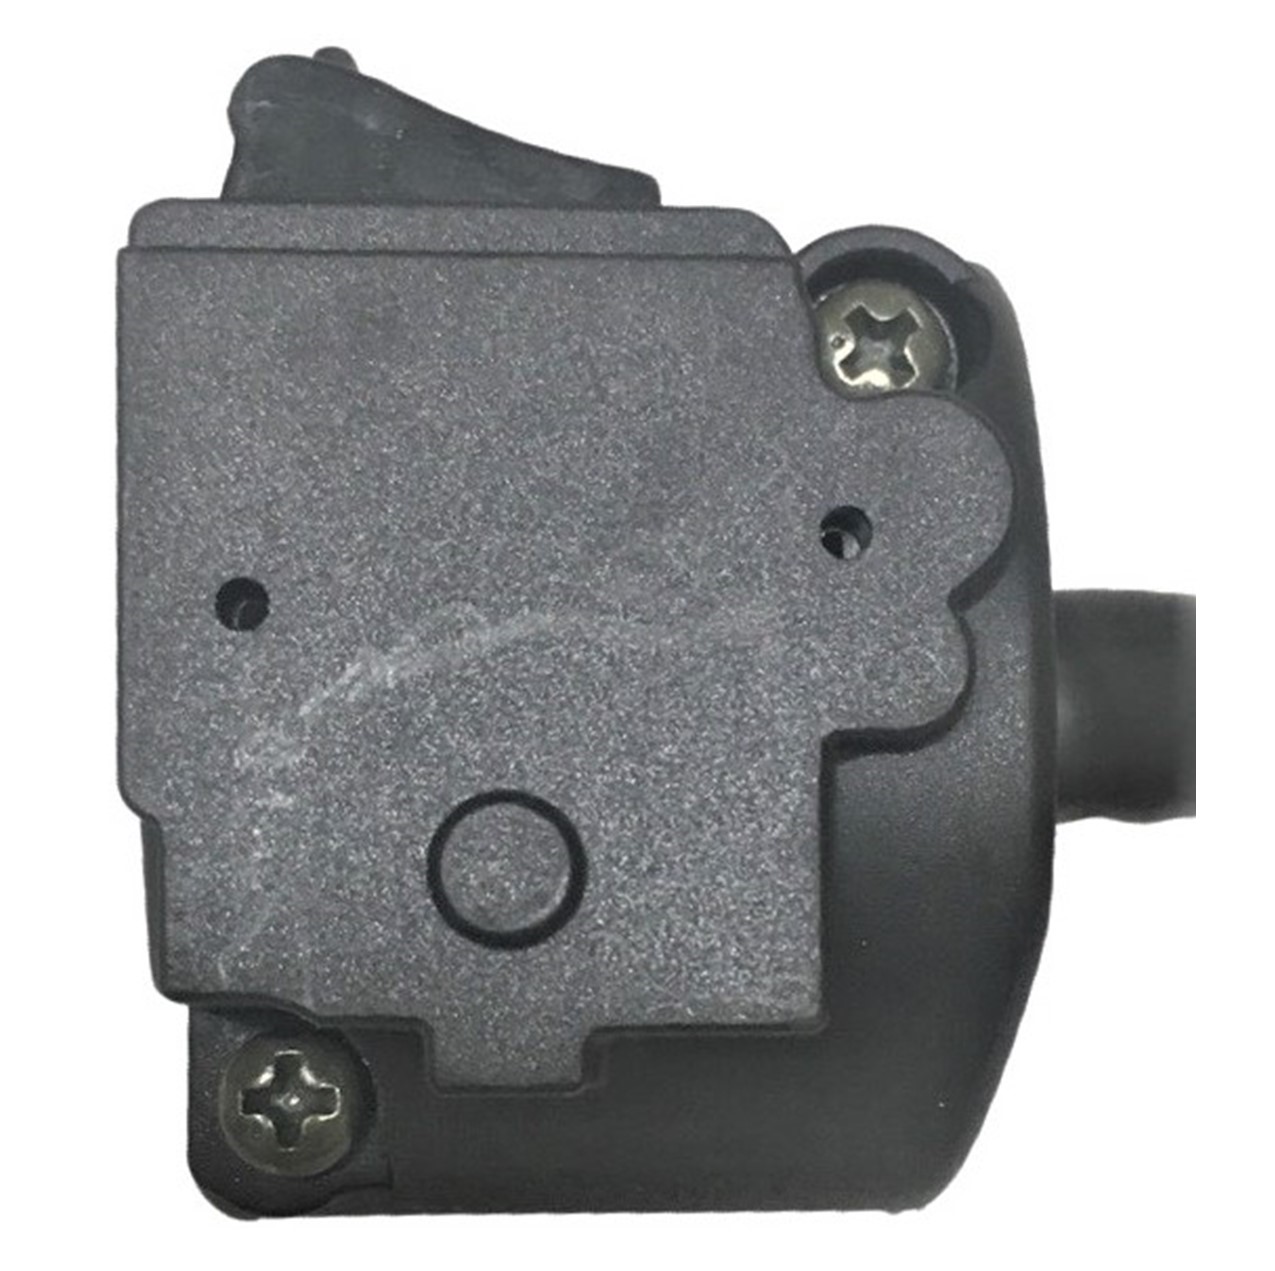 Handlebar Switch (Left Hand) 6 Pins in 6 Pin Male Jack Fits many TaoTao ATVs & Coleman ATVs models + others